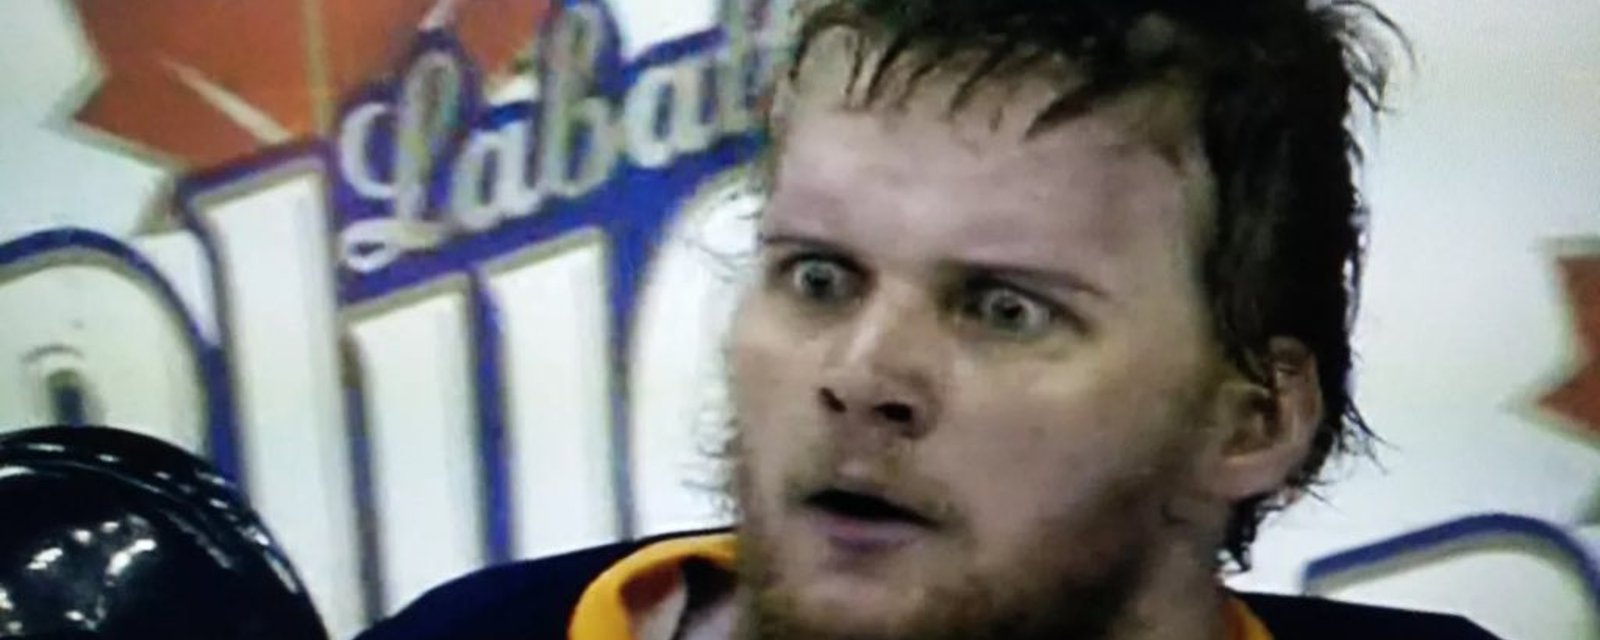 Robin Lehner gives fans in Buffalo a piece of his mind.